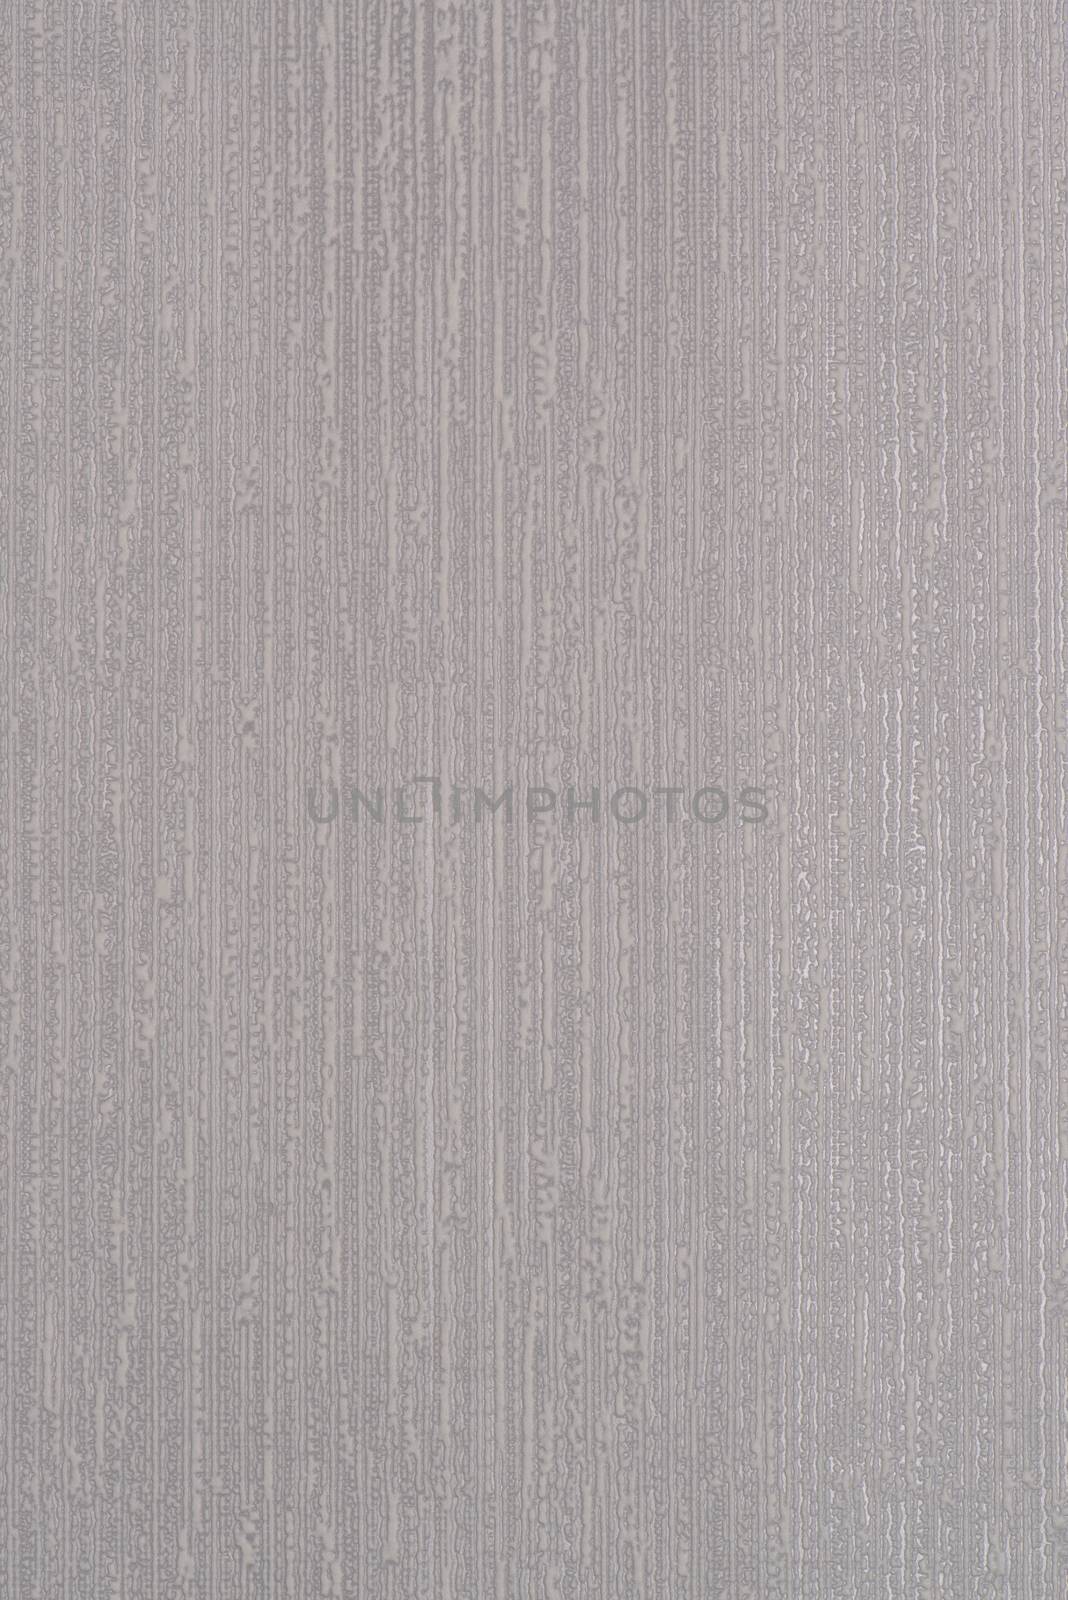 Grey wallpaper embossed texture for background.